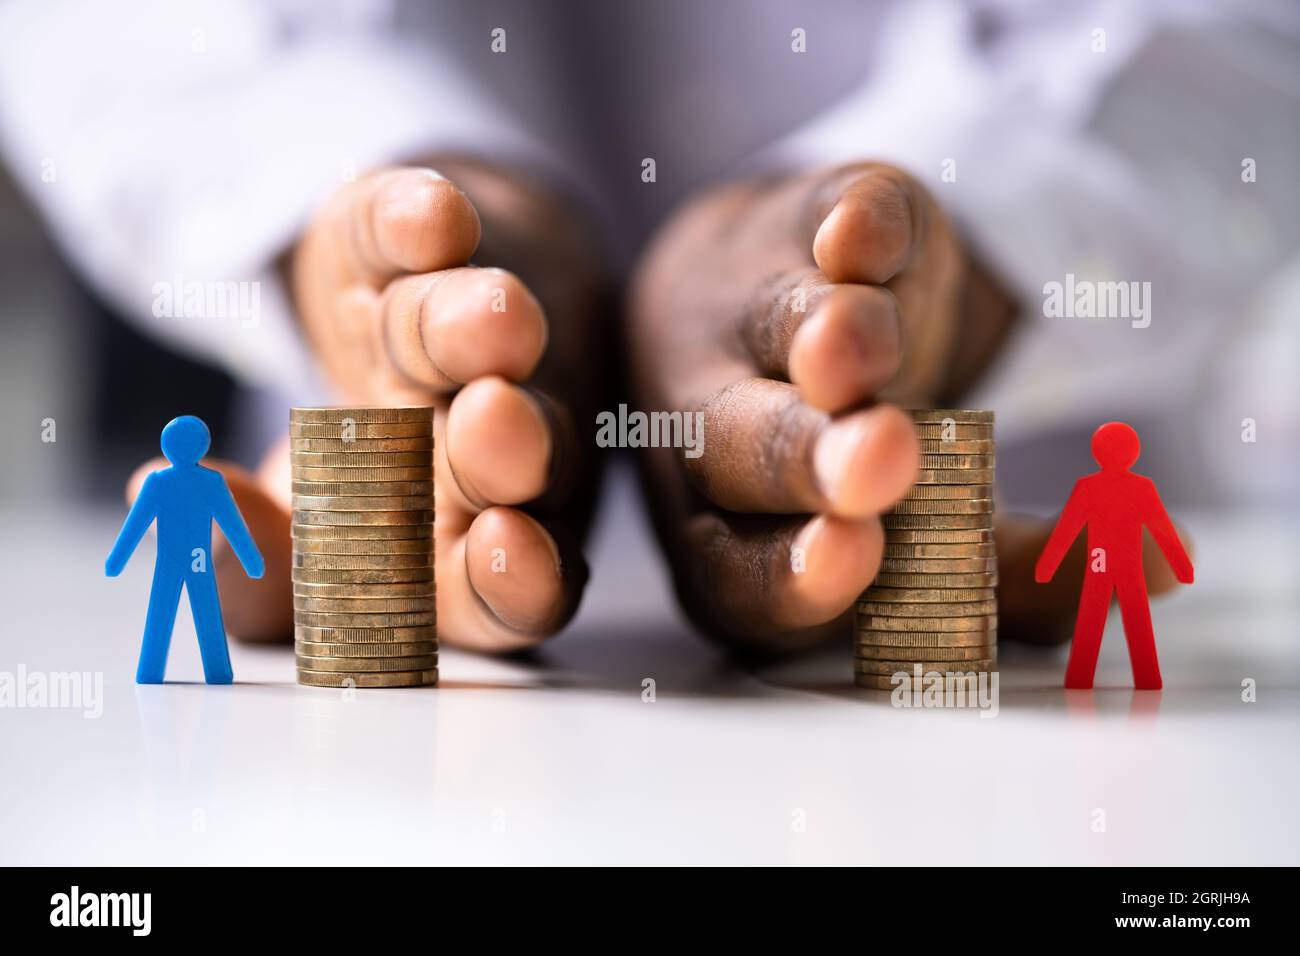 African American Hand Separating Money. Income And Investment Stock Photo